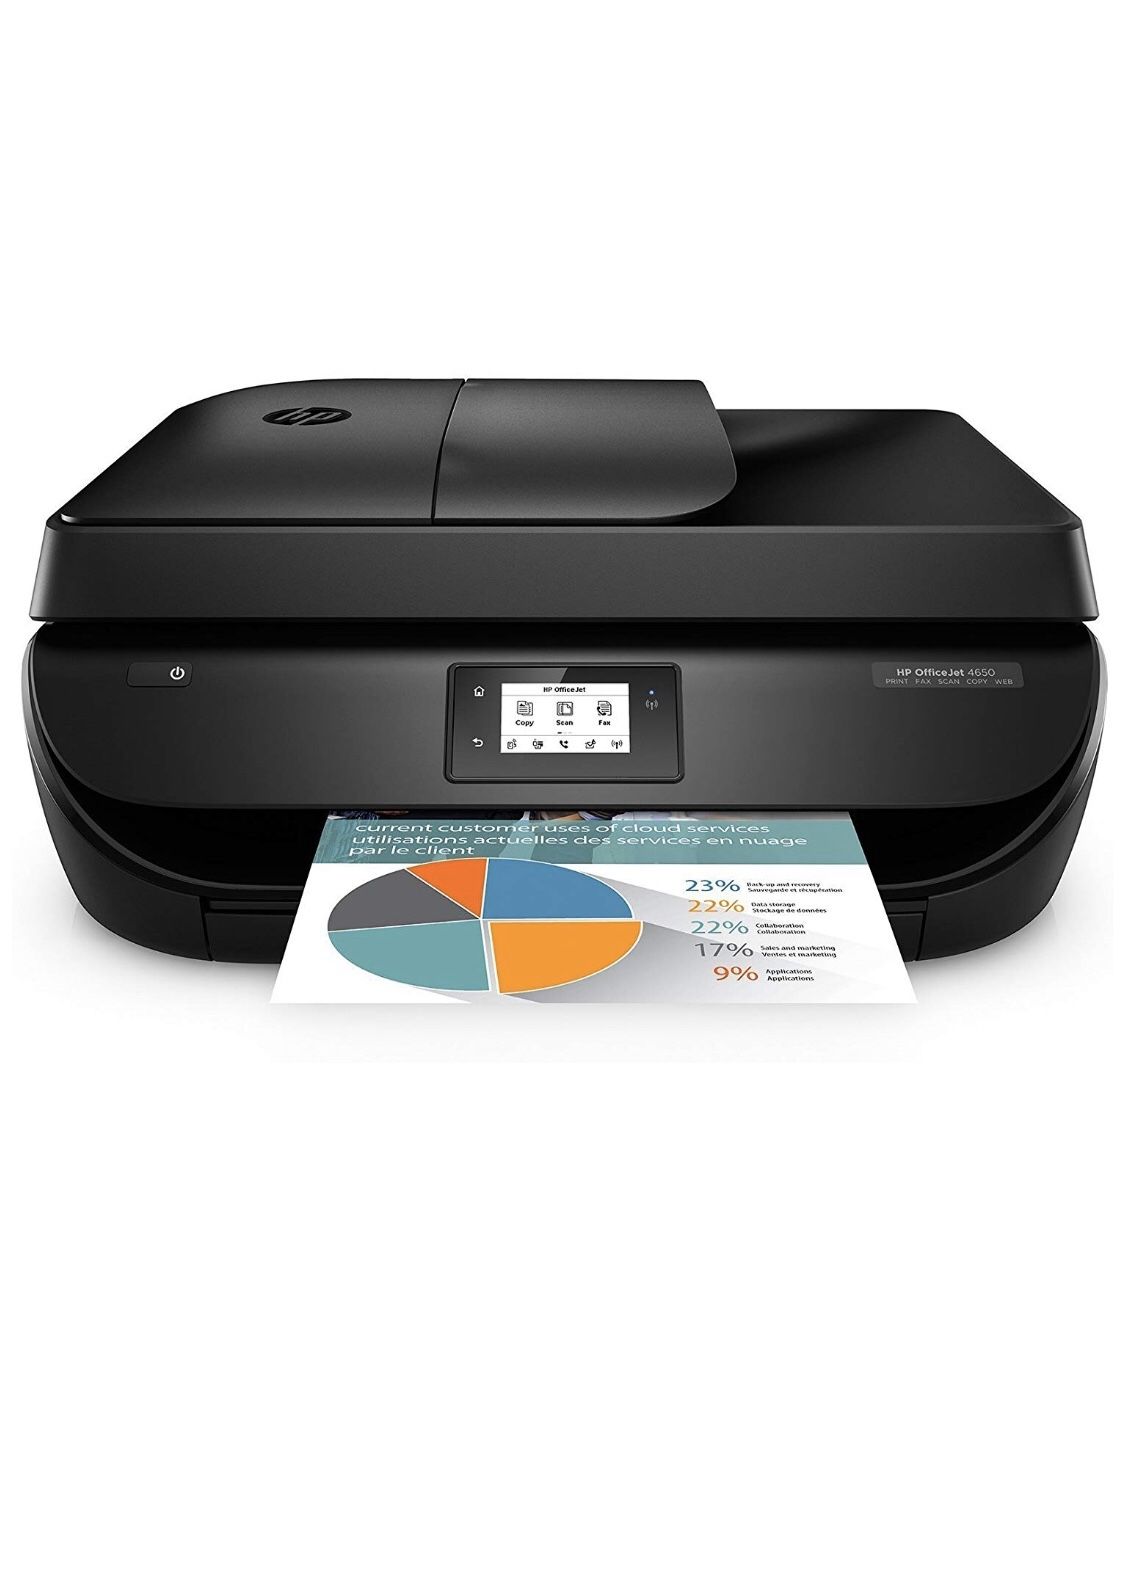 HP4650-RB-AMZ Office Jet 4650 Wireless All-in-One Photo Printer, Copier and Scanner